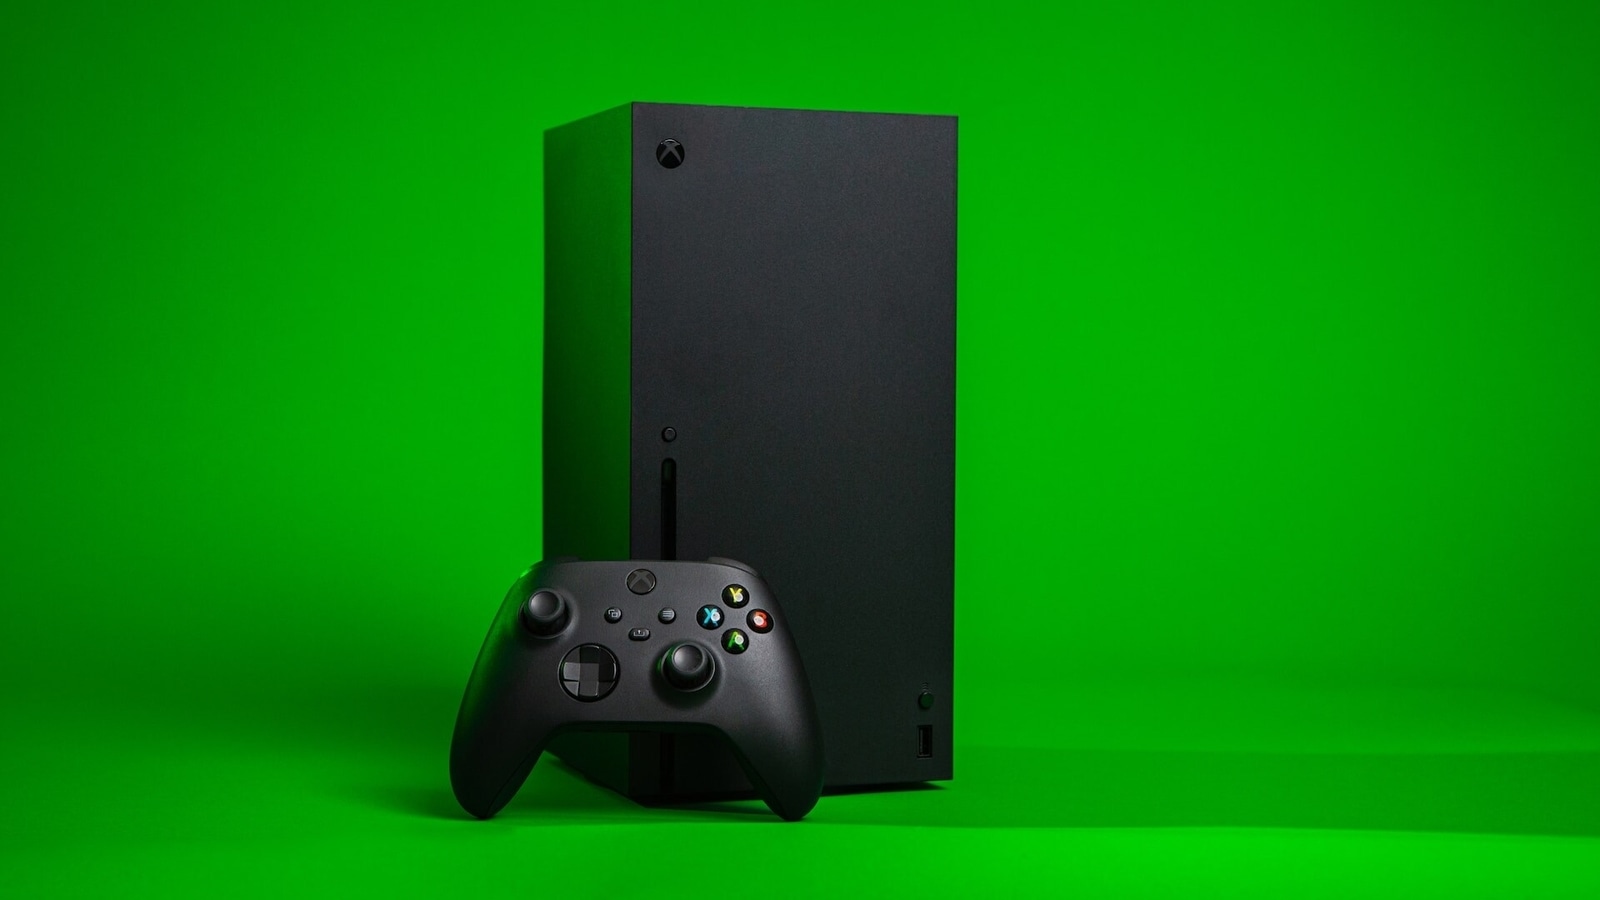 Xbox Leaks Reveal Big Plans For Microsoft, Next-Gen Consoles In 2028